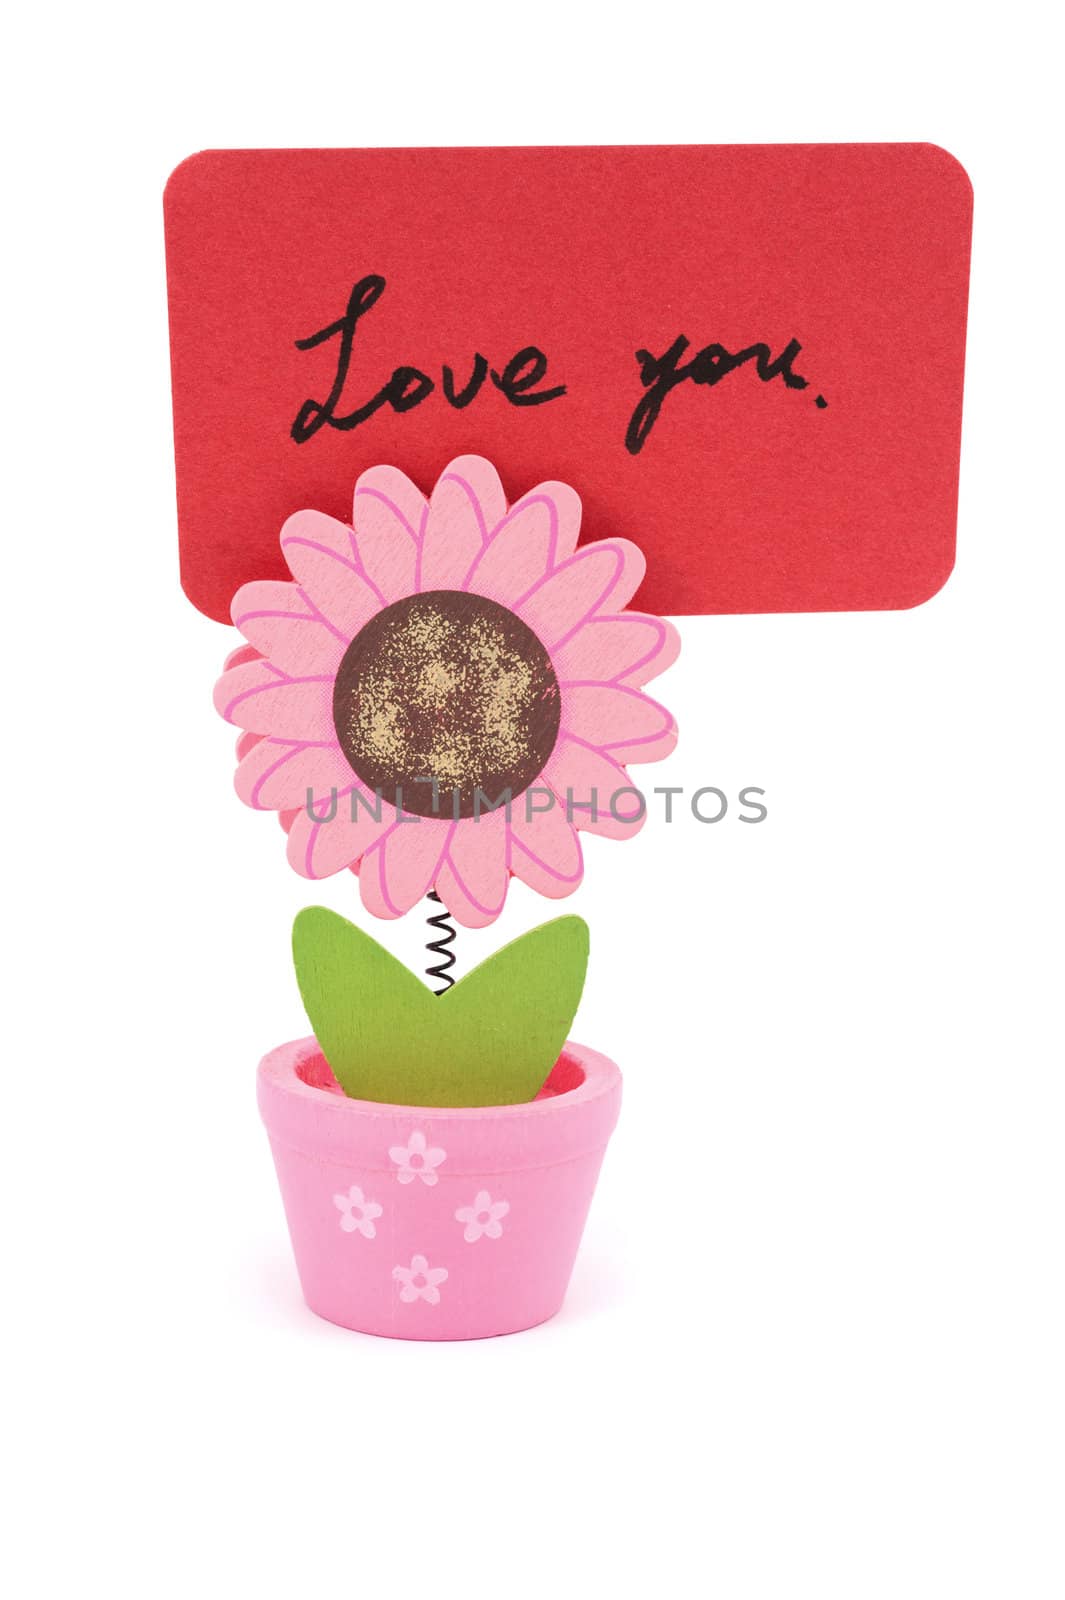 Love you words written on red paper of sun flower pot clip